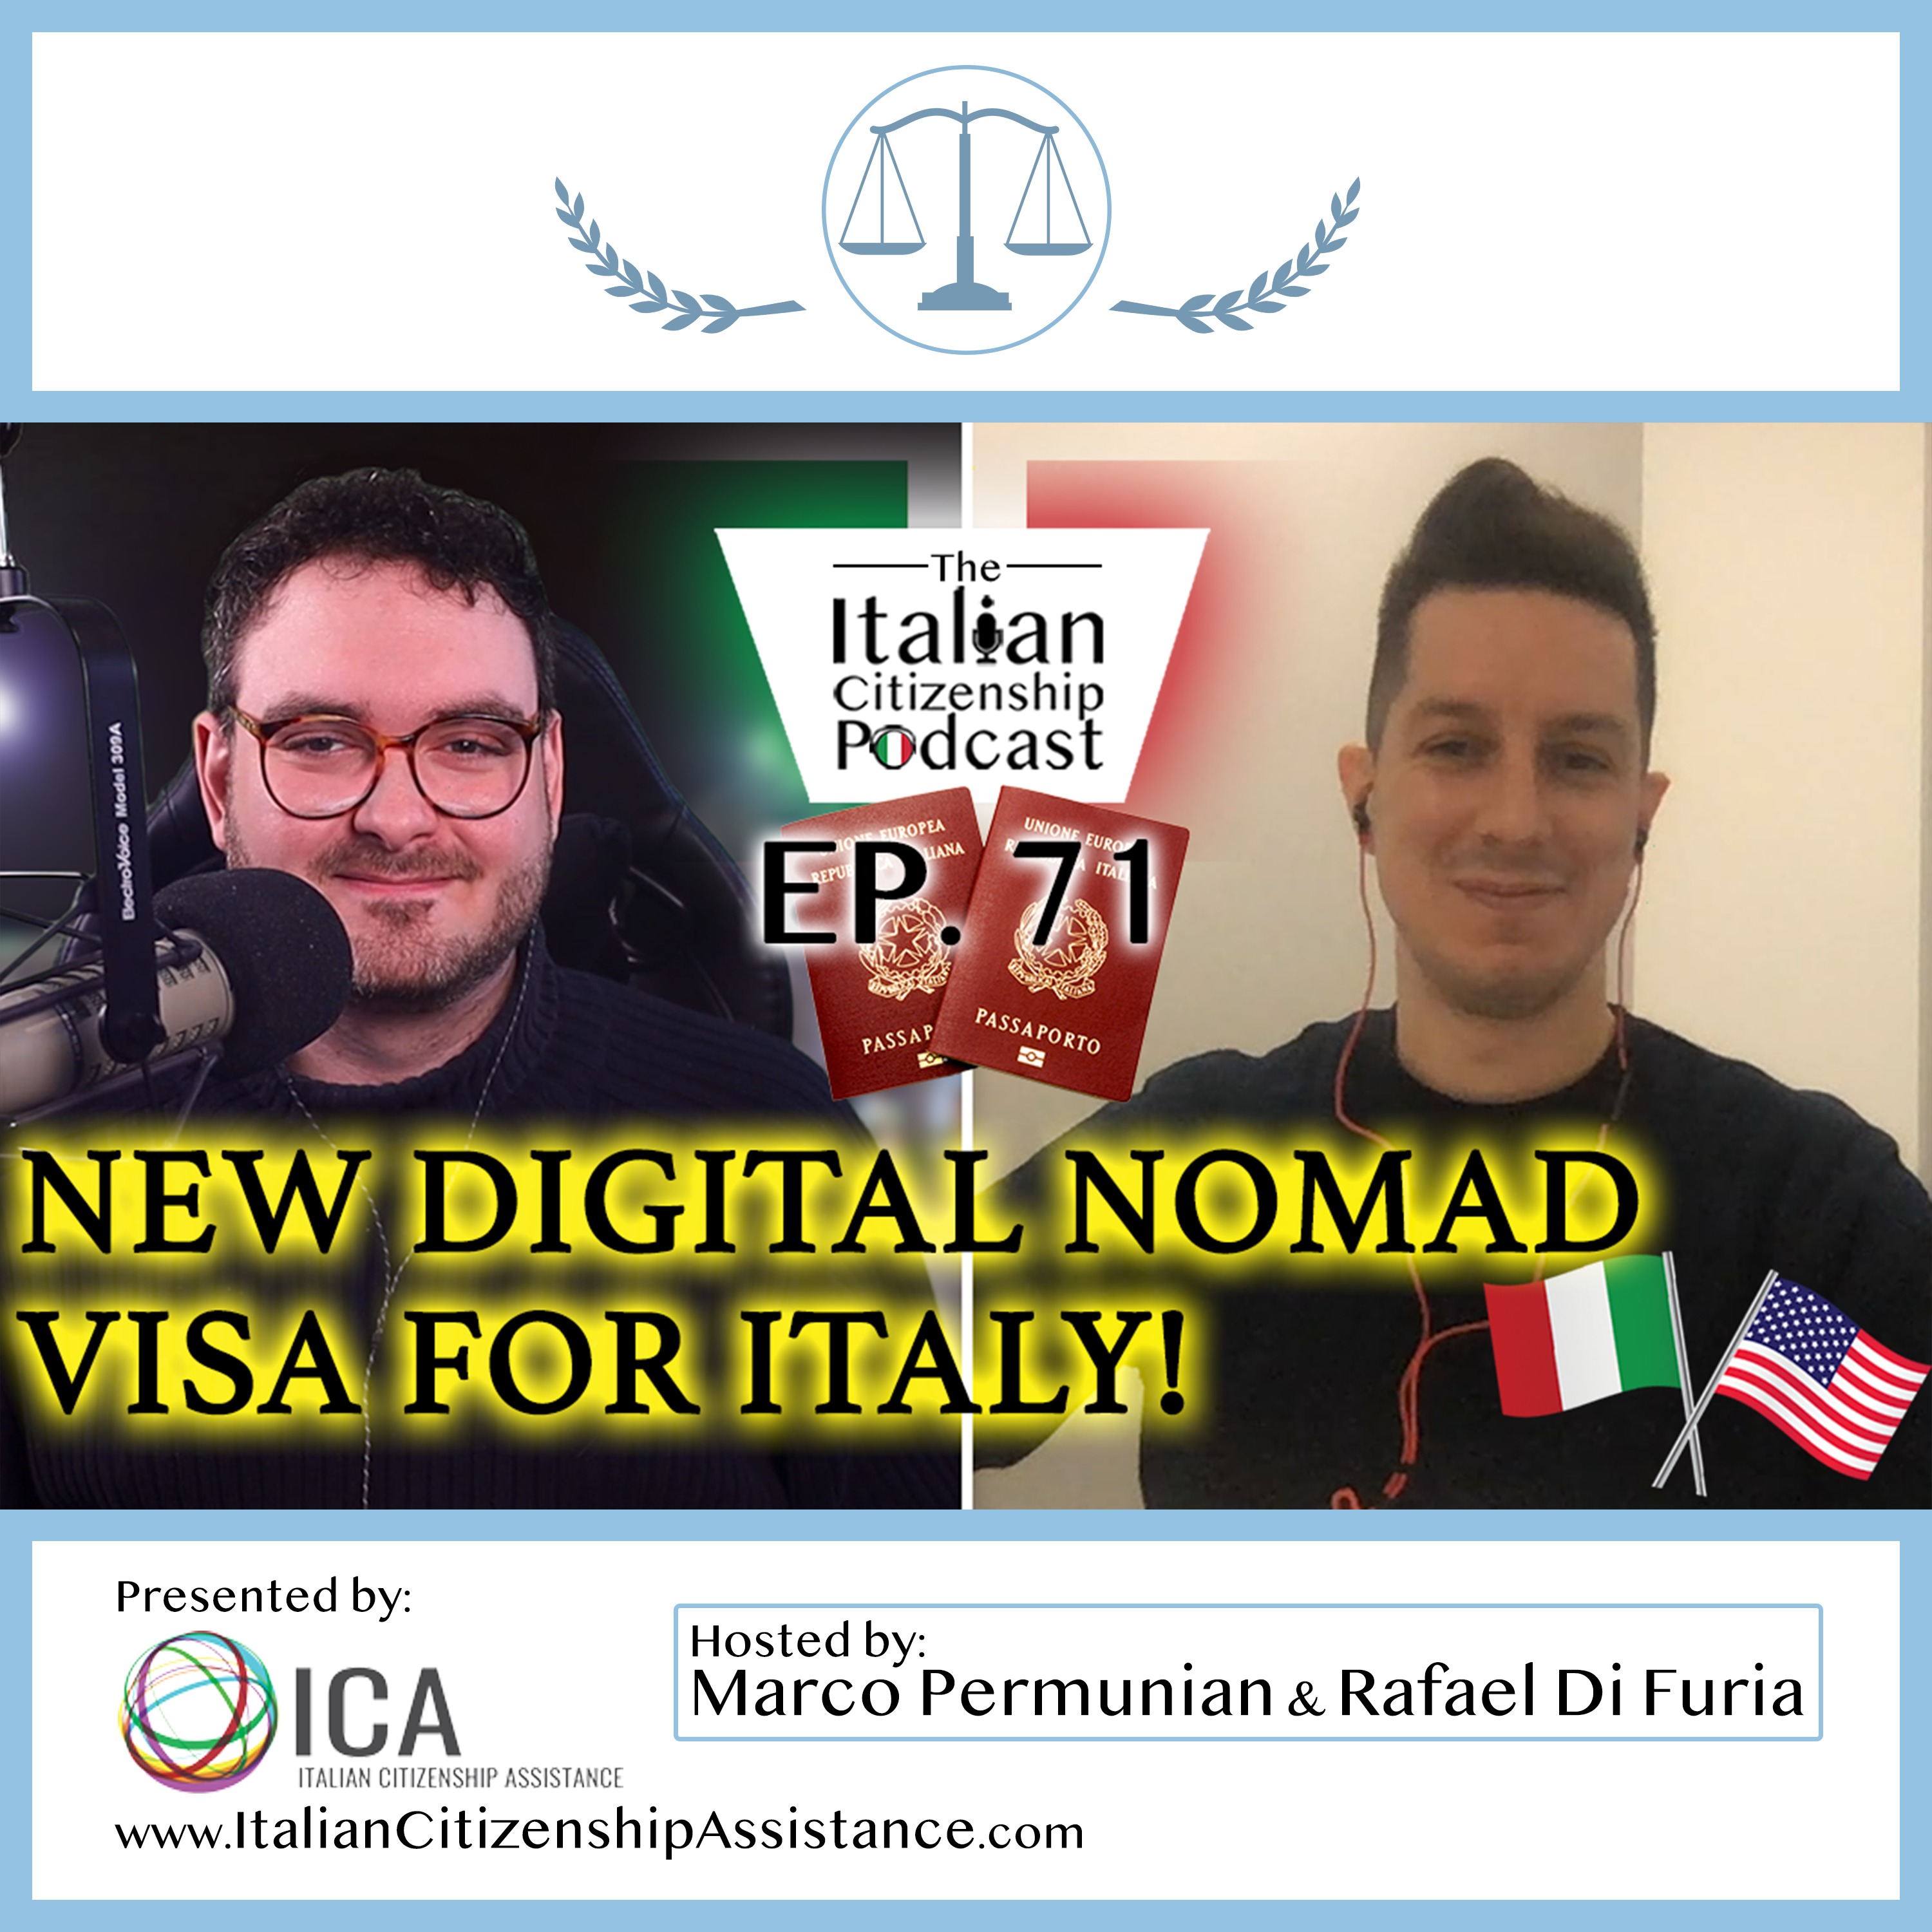 New Digital Nomad Visa for Italy is Finally Coming! - Part 1